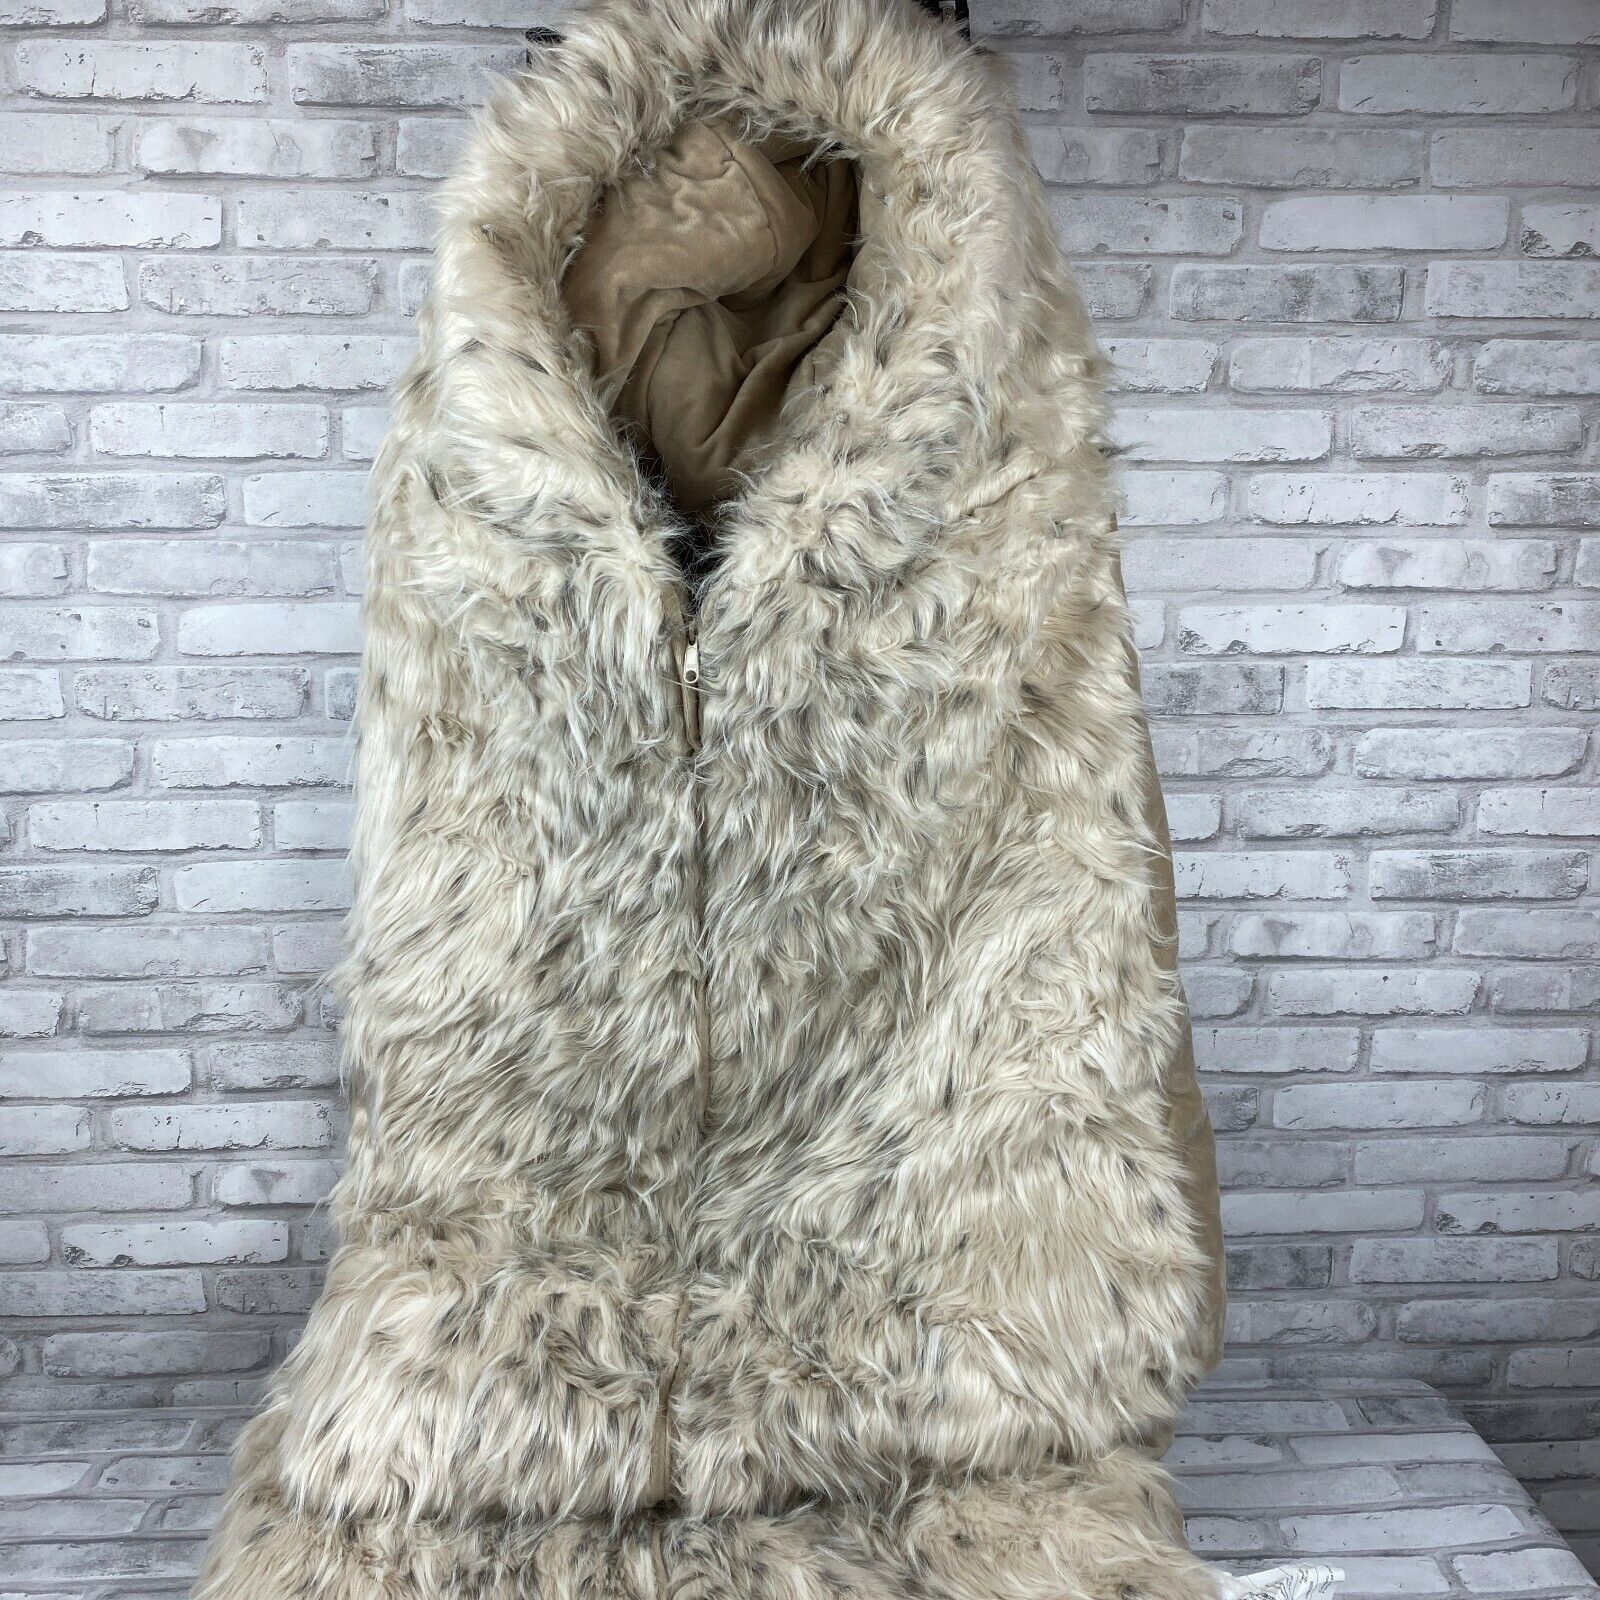 Pottery Barn Teen Sleeping Bag Faux Fur Tan Brown Spotted Hooded Zip Front - $81.26